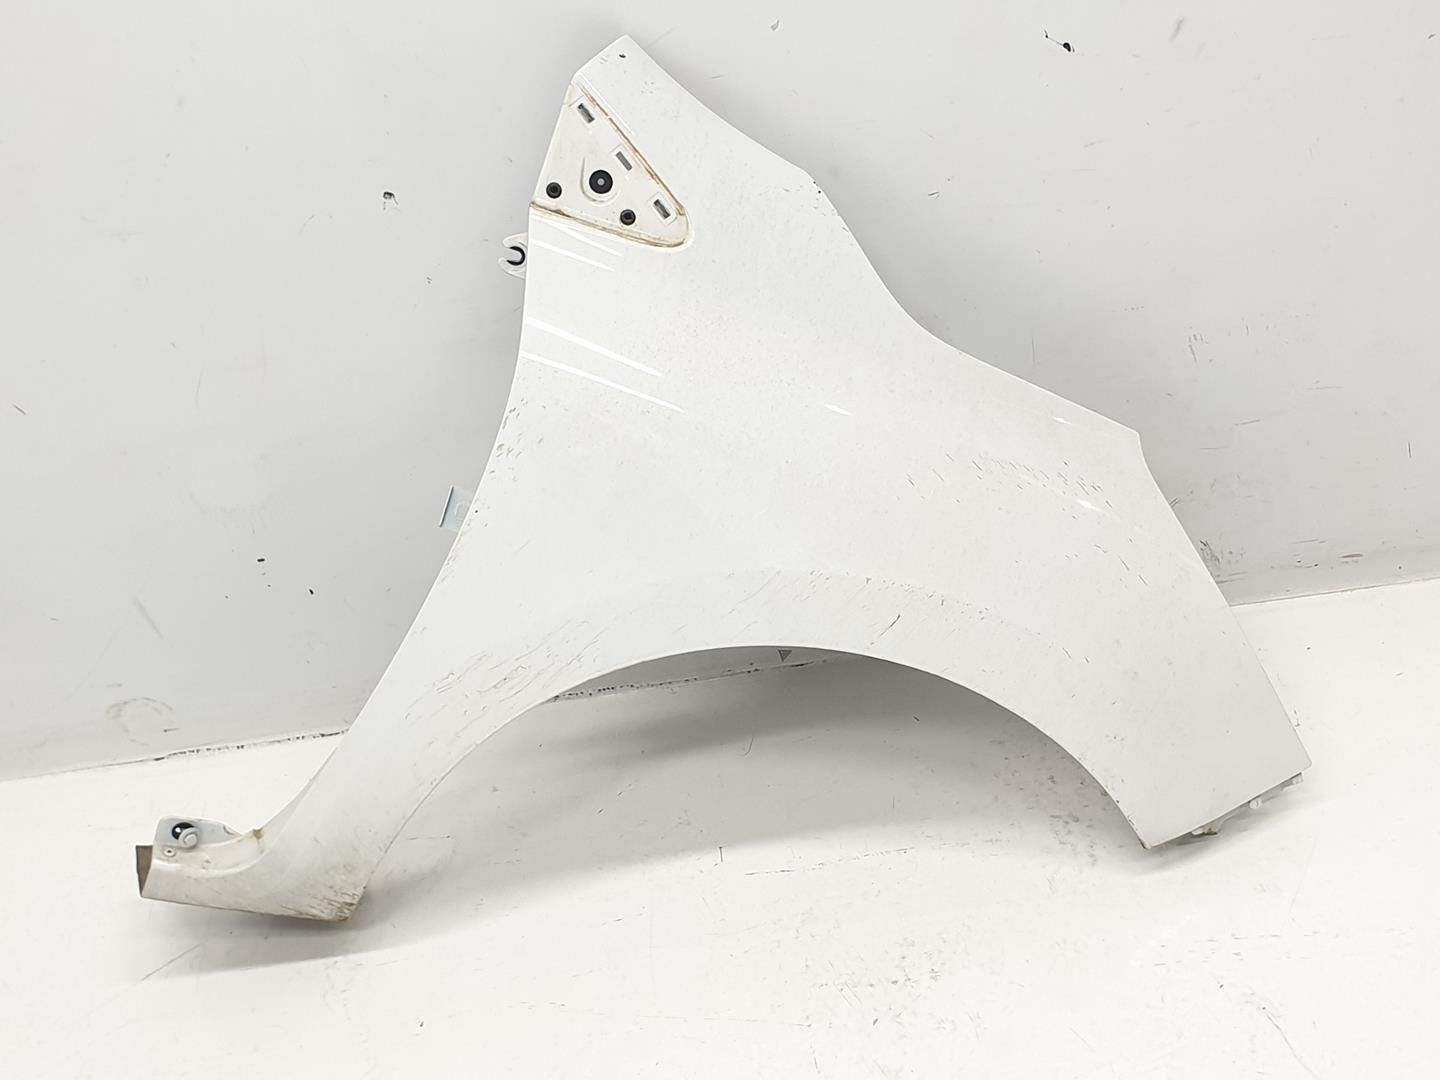 RENAULT Clio 4 generation (2012-2020) Front Right Fender 631002841R, 631002841R, COLORBLANCO 24700036